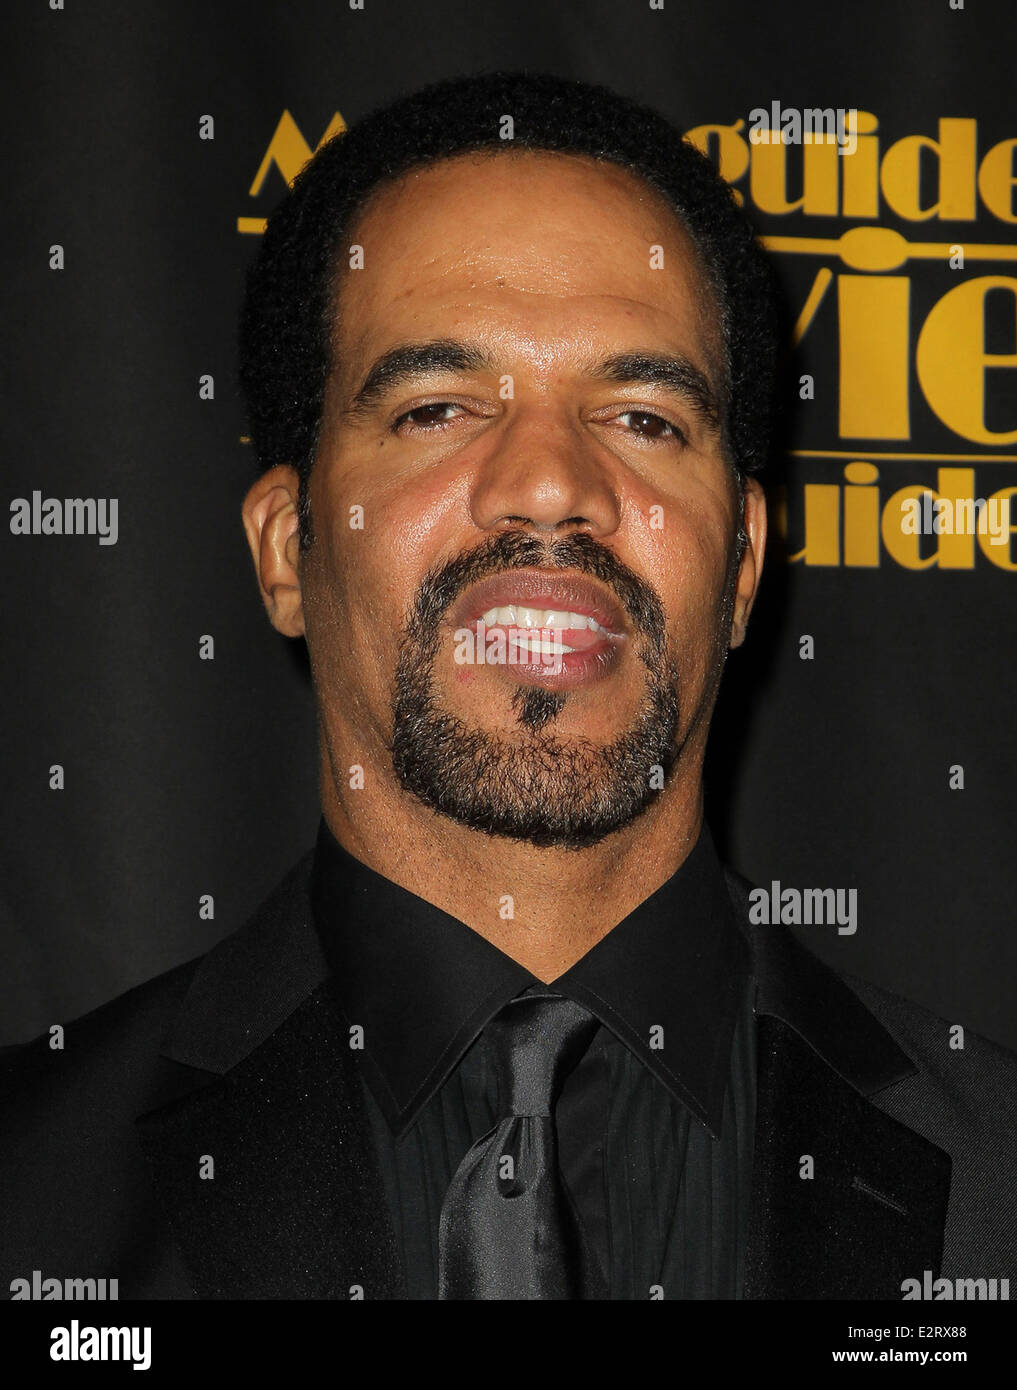 The 21st Annual Movieguide Awards held at the Universal Hilton Hotel - Arrivals  Featuring: Kristoff St. John Where: Hollywood, Stock Photo